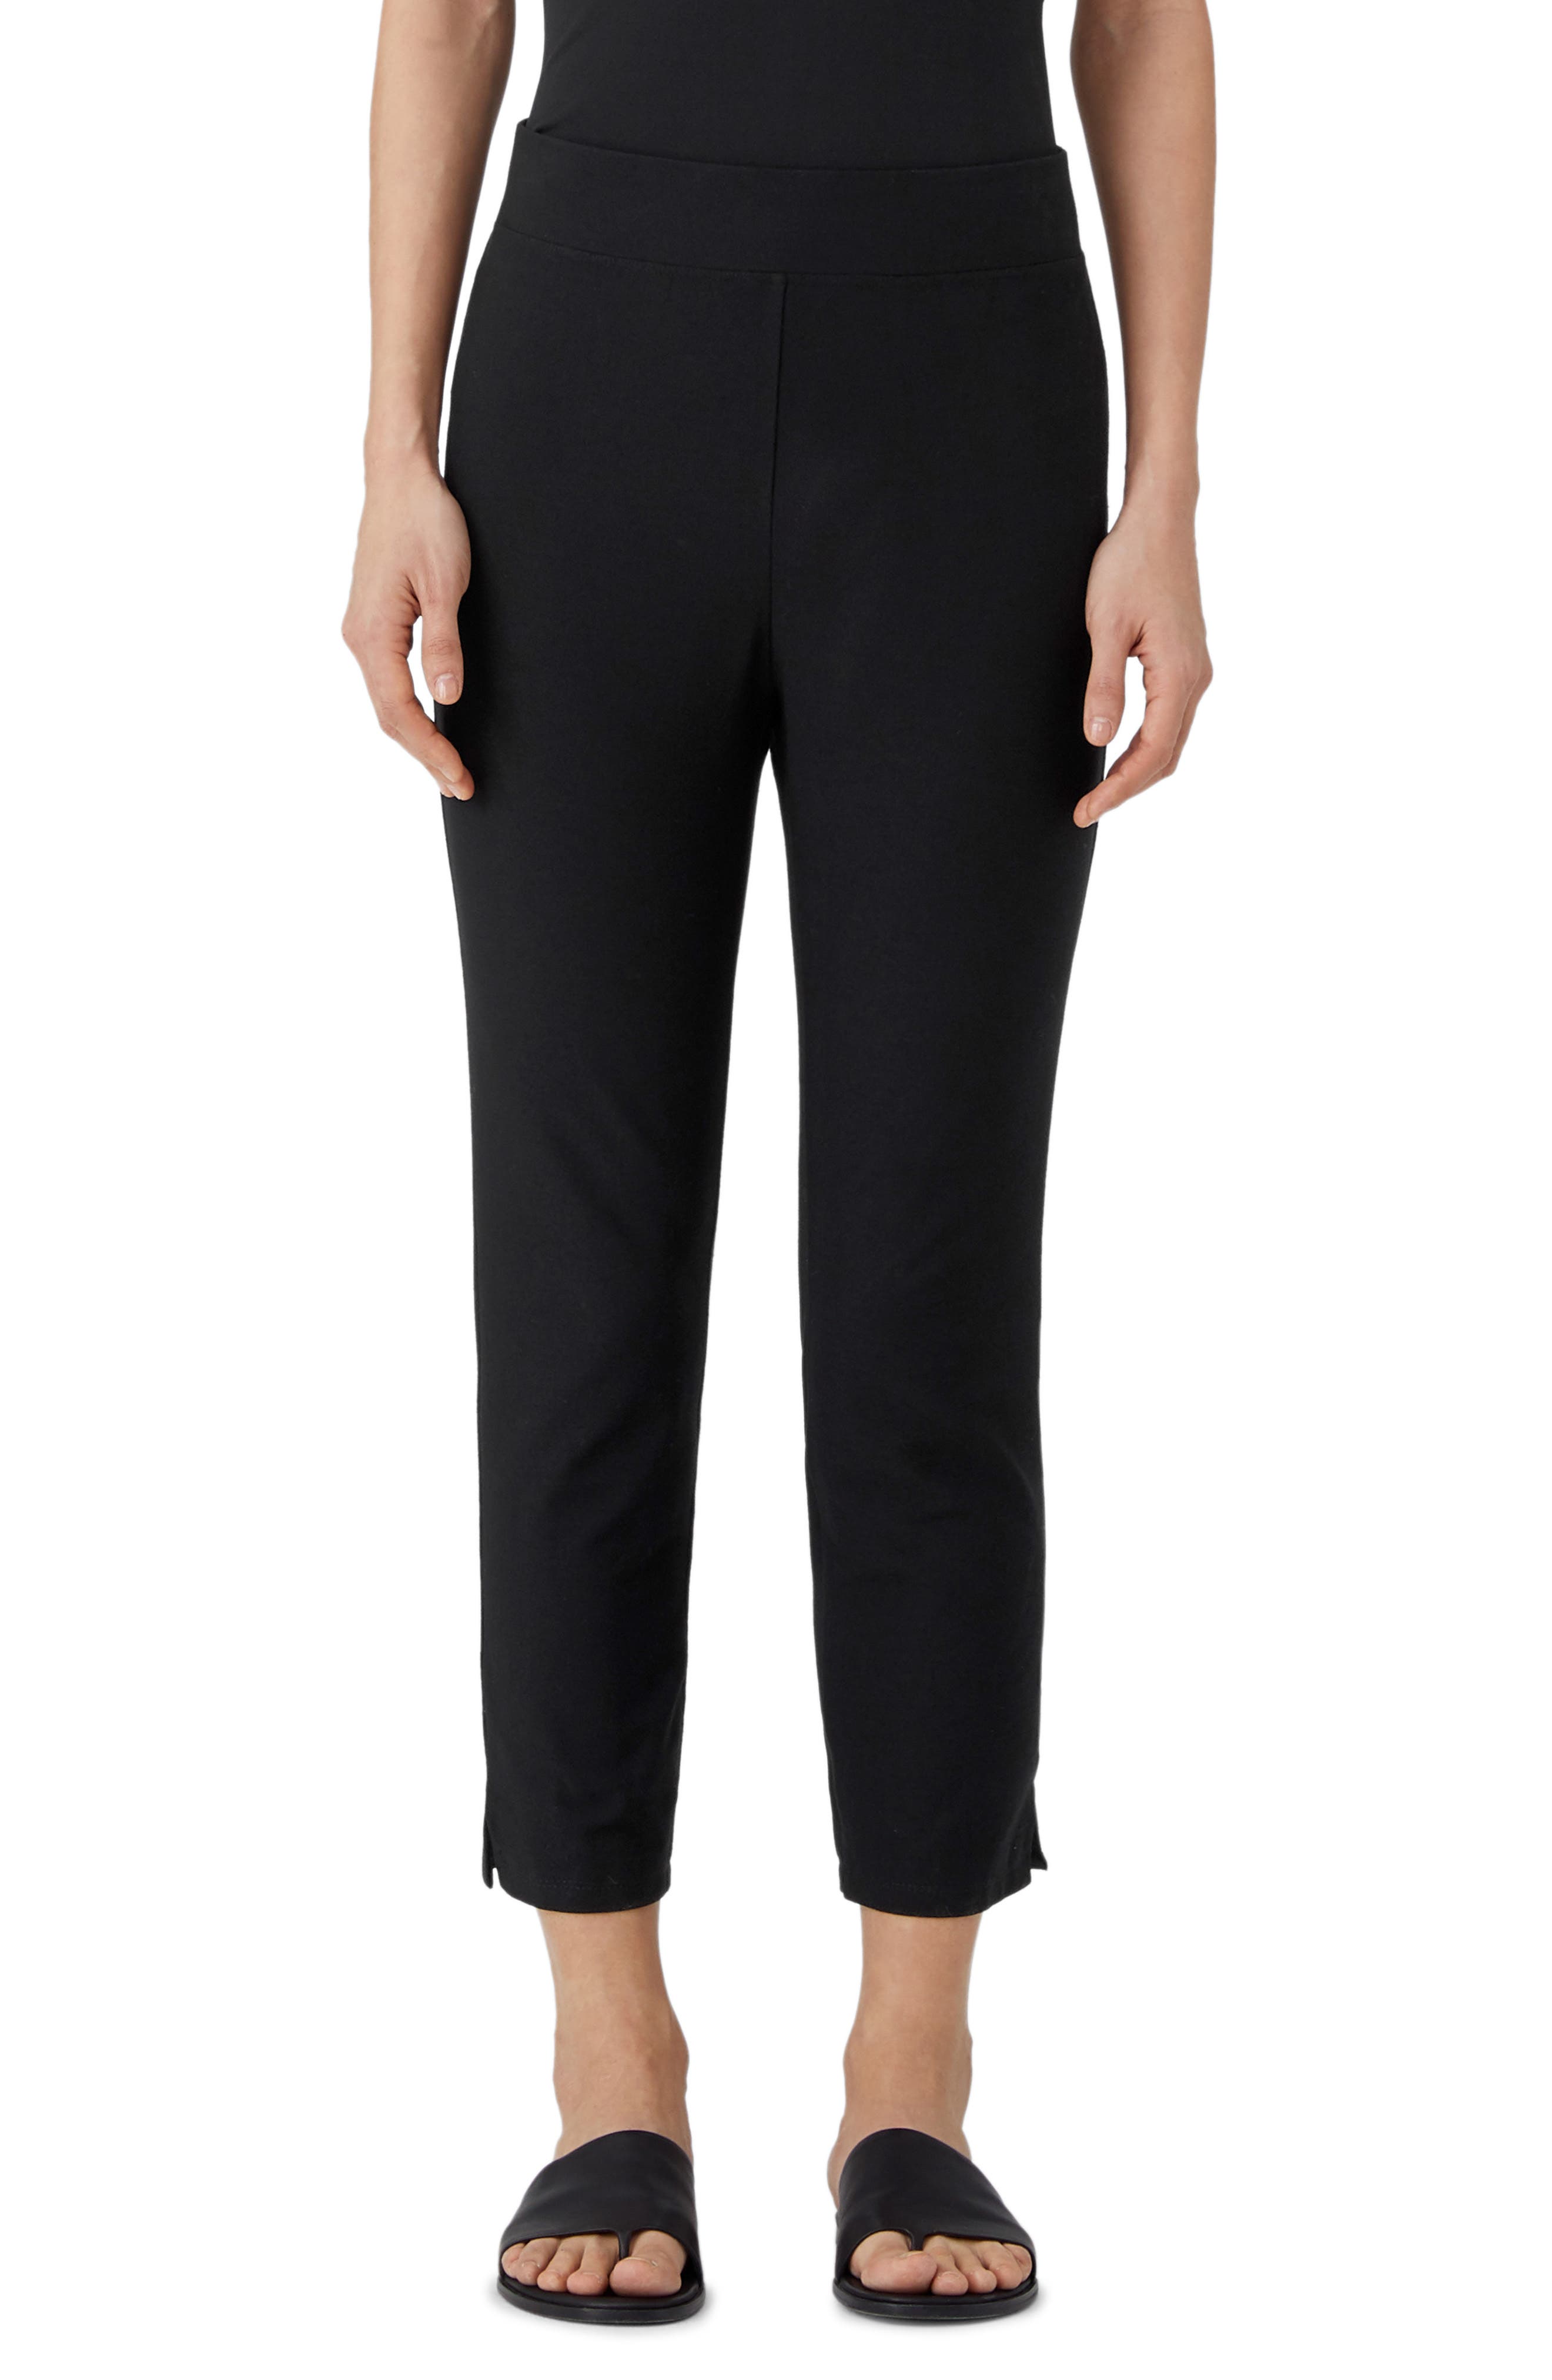 NEW Eileen Fisher Stretch Crepe Slim Ankle Pants in Black Size XS #P710